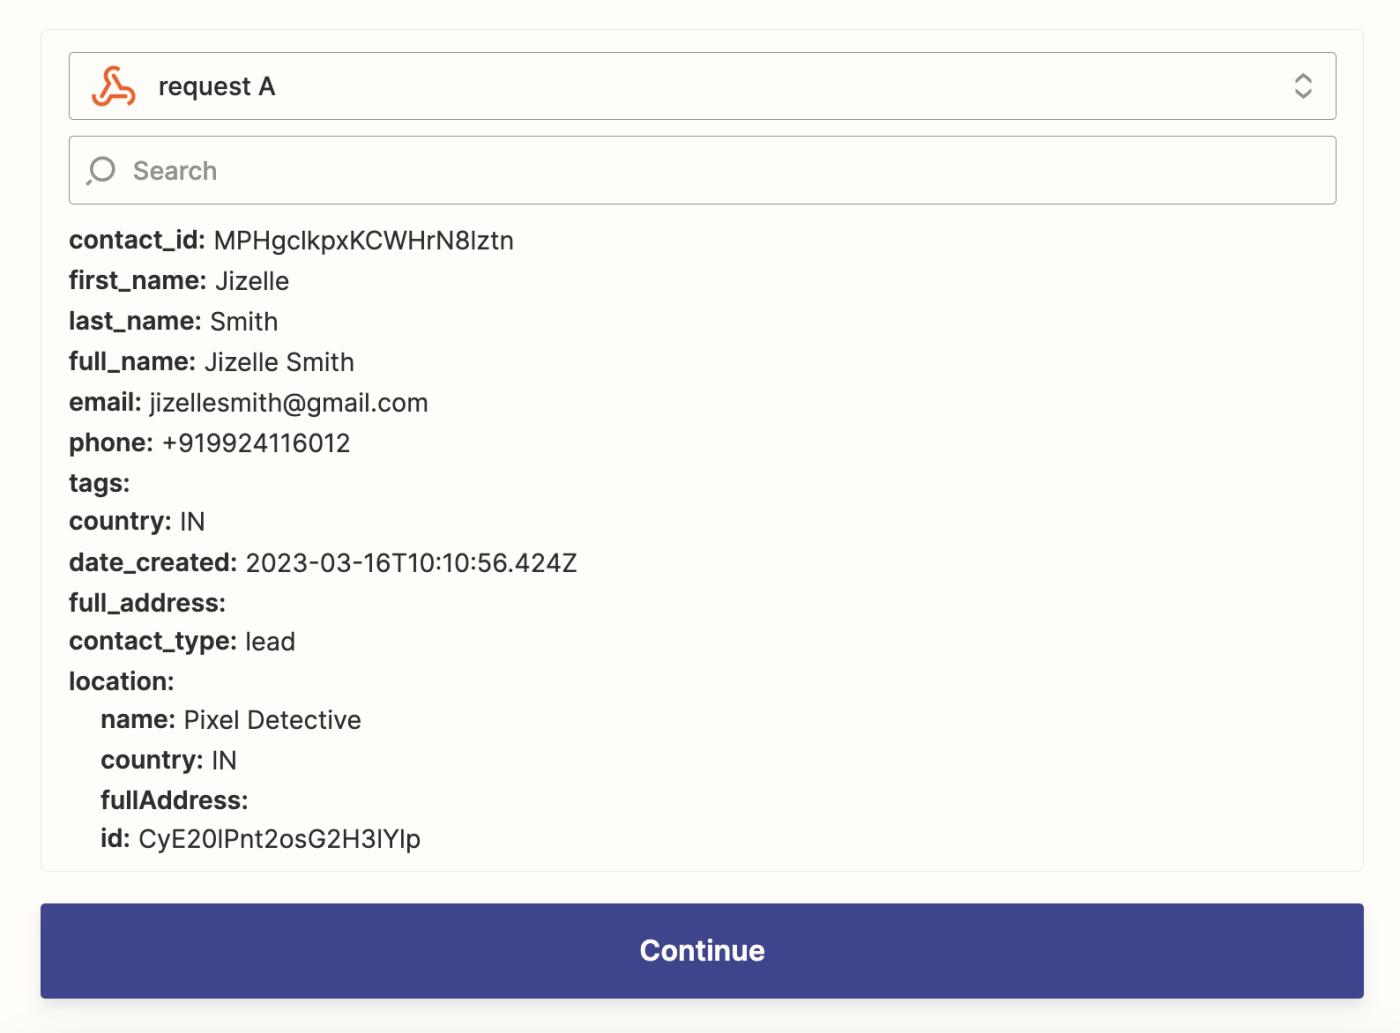 A successful test shows contact info pulled in from the webhook.